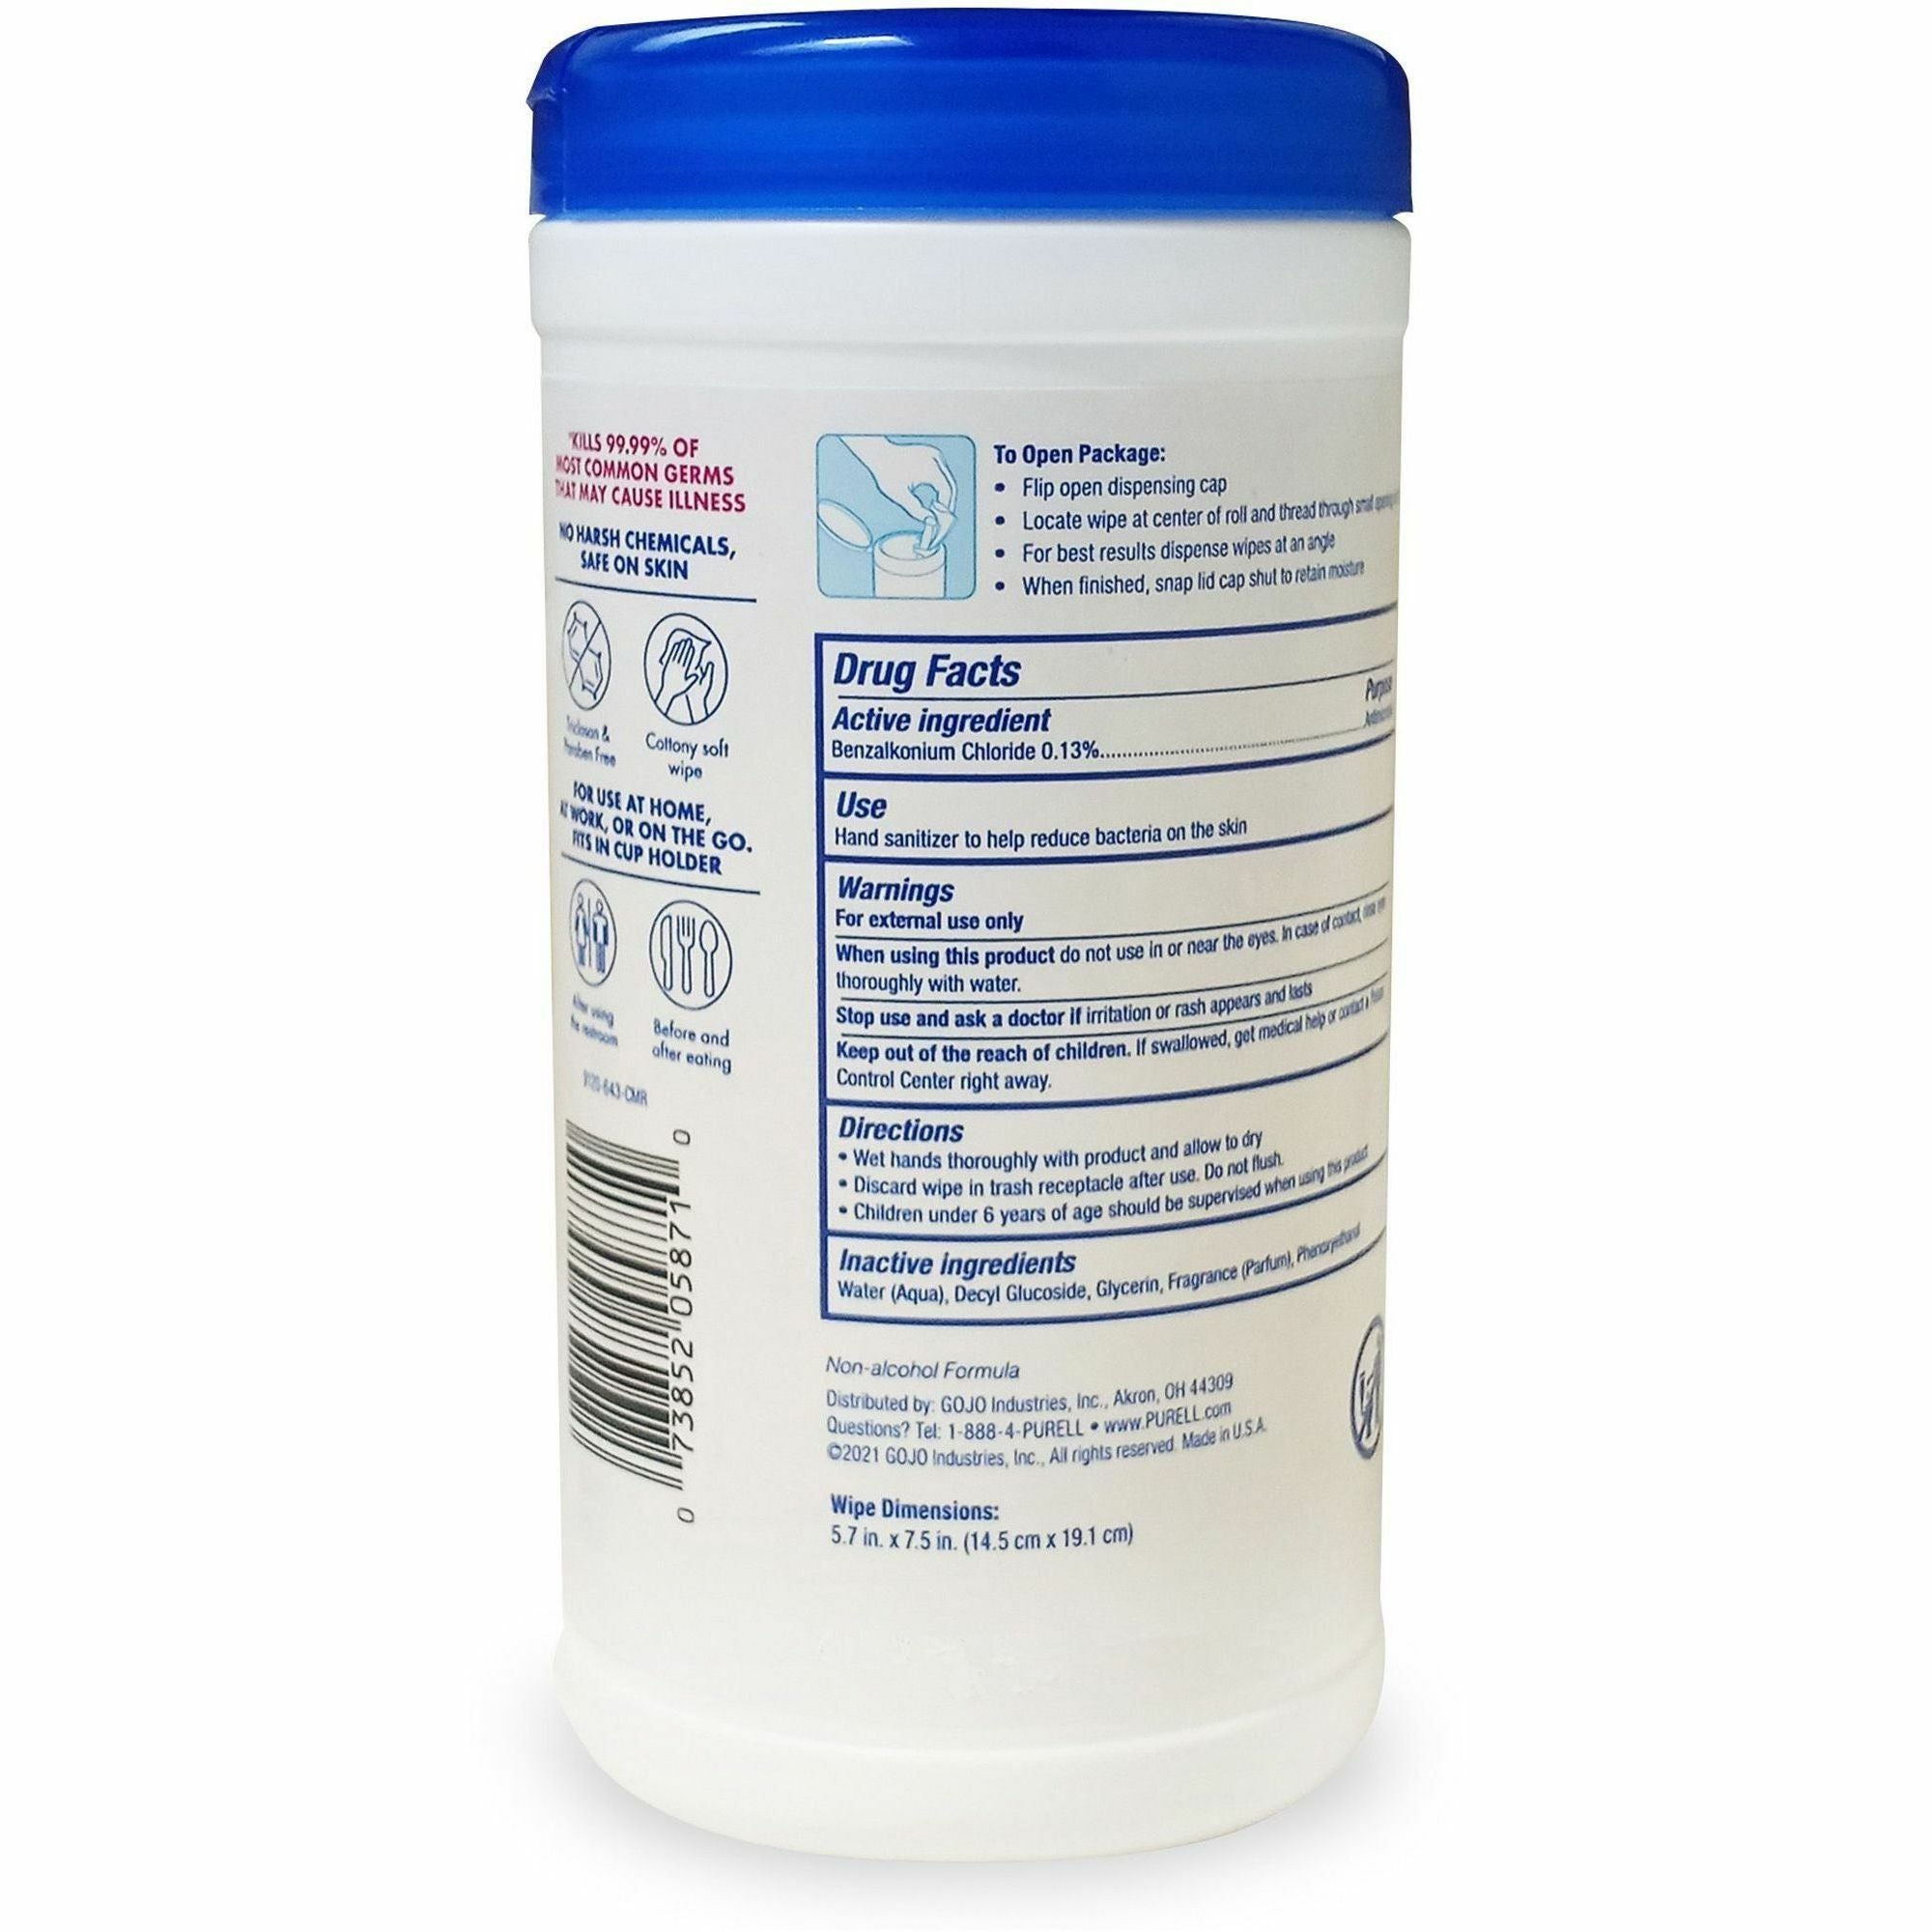 purell-clean-scent-hand-sanitizing-wipes-clean-white-durable-alcohol-free-for-hand-multi-surface-40-per-canister-6-carton_goj912006cmrct - 2